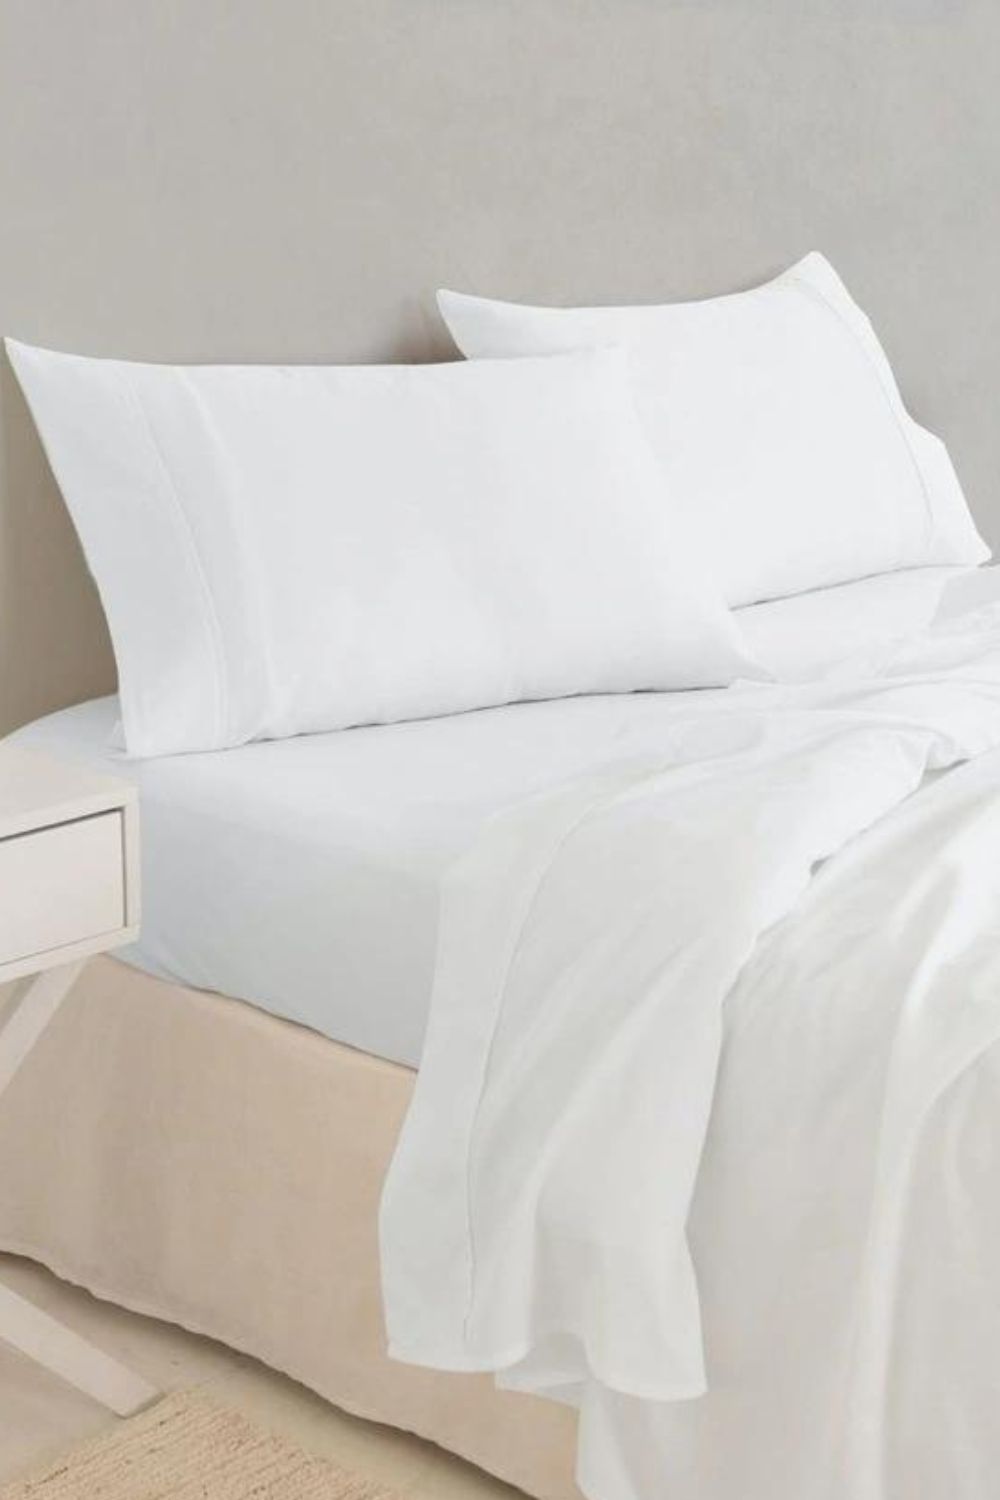 sheets-for-hot-sleepers